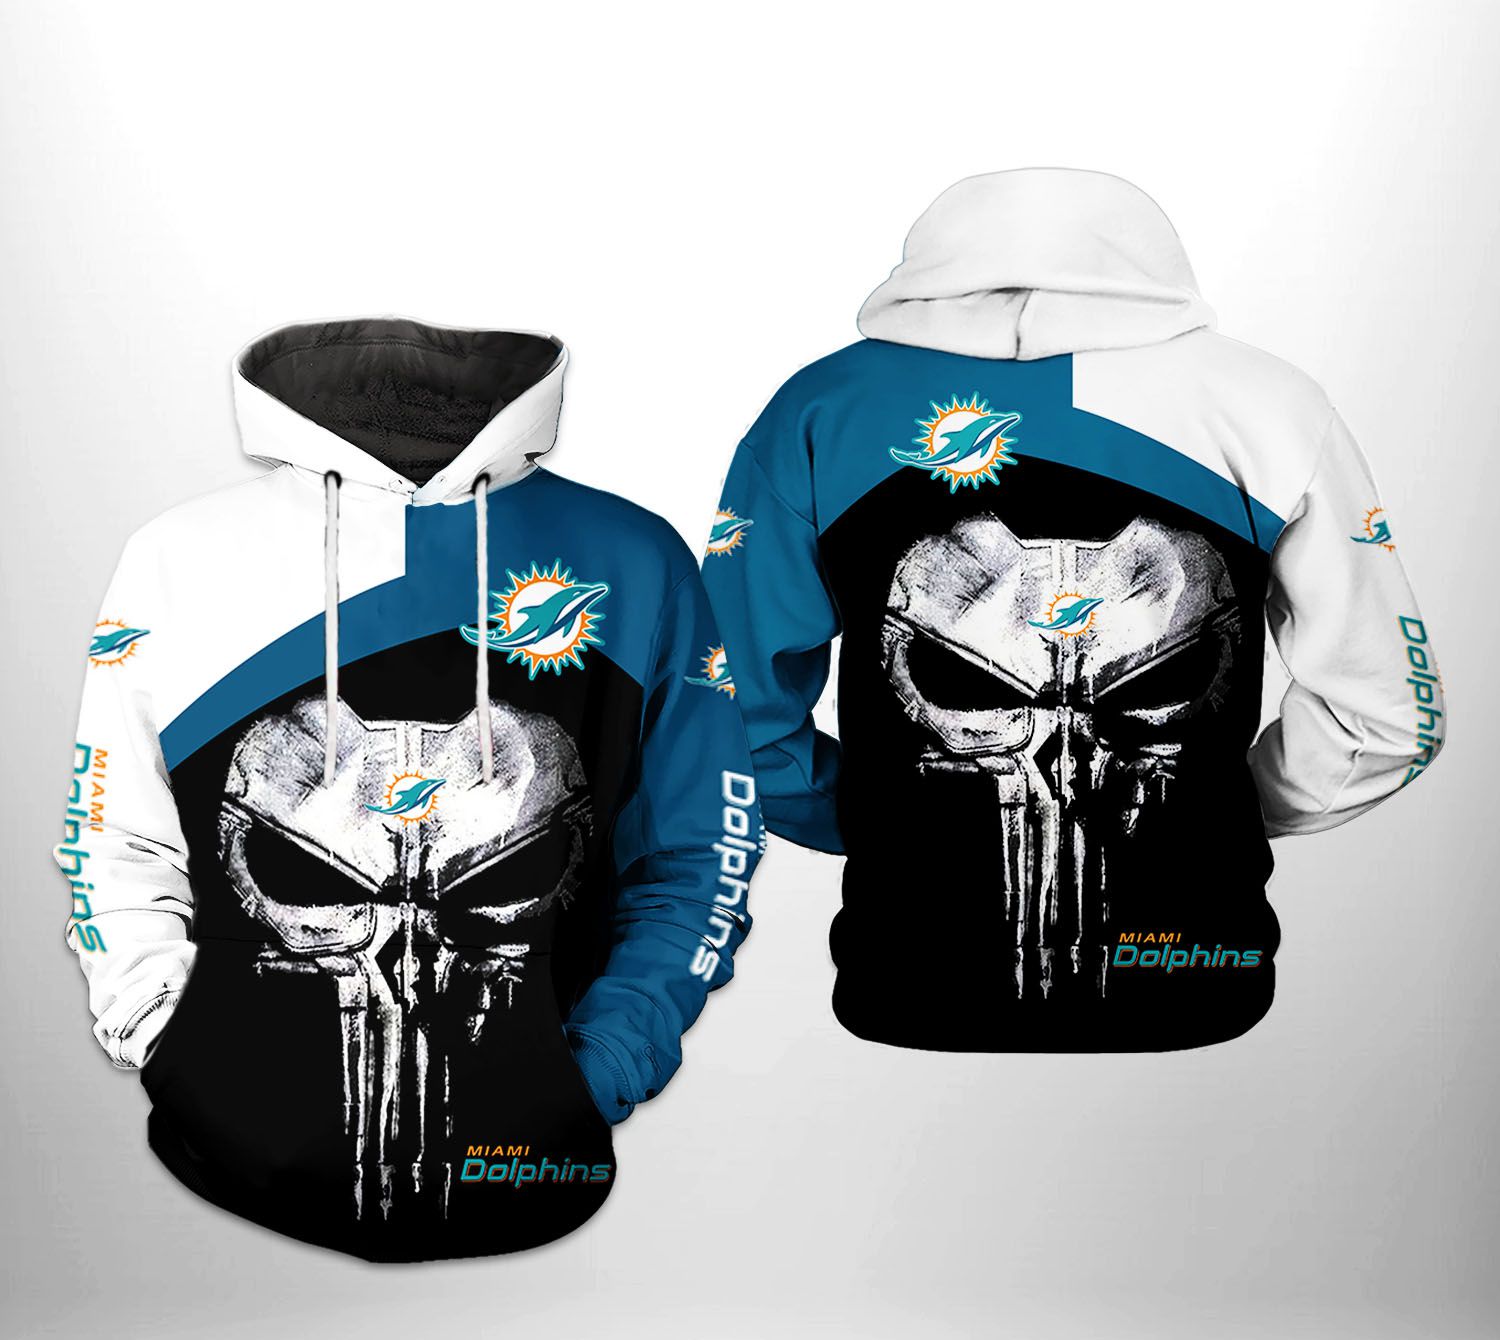 Miami Dolphins Shop - Miami Dolphins NFL Skull Punisher Team 3D Printed HoodieZipper Hoodie